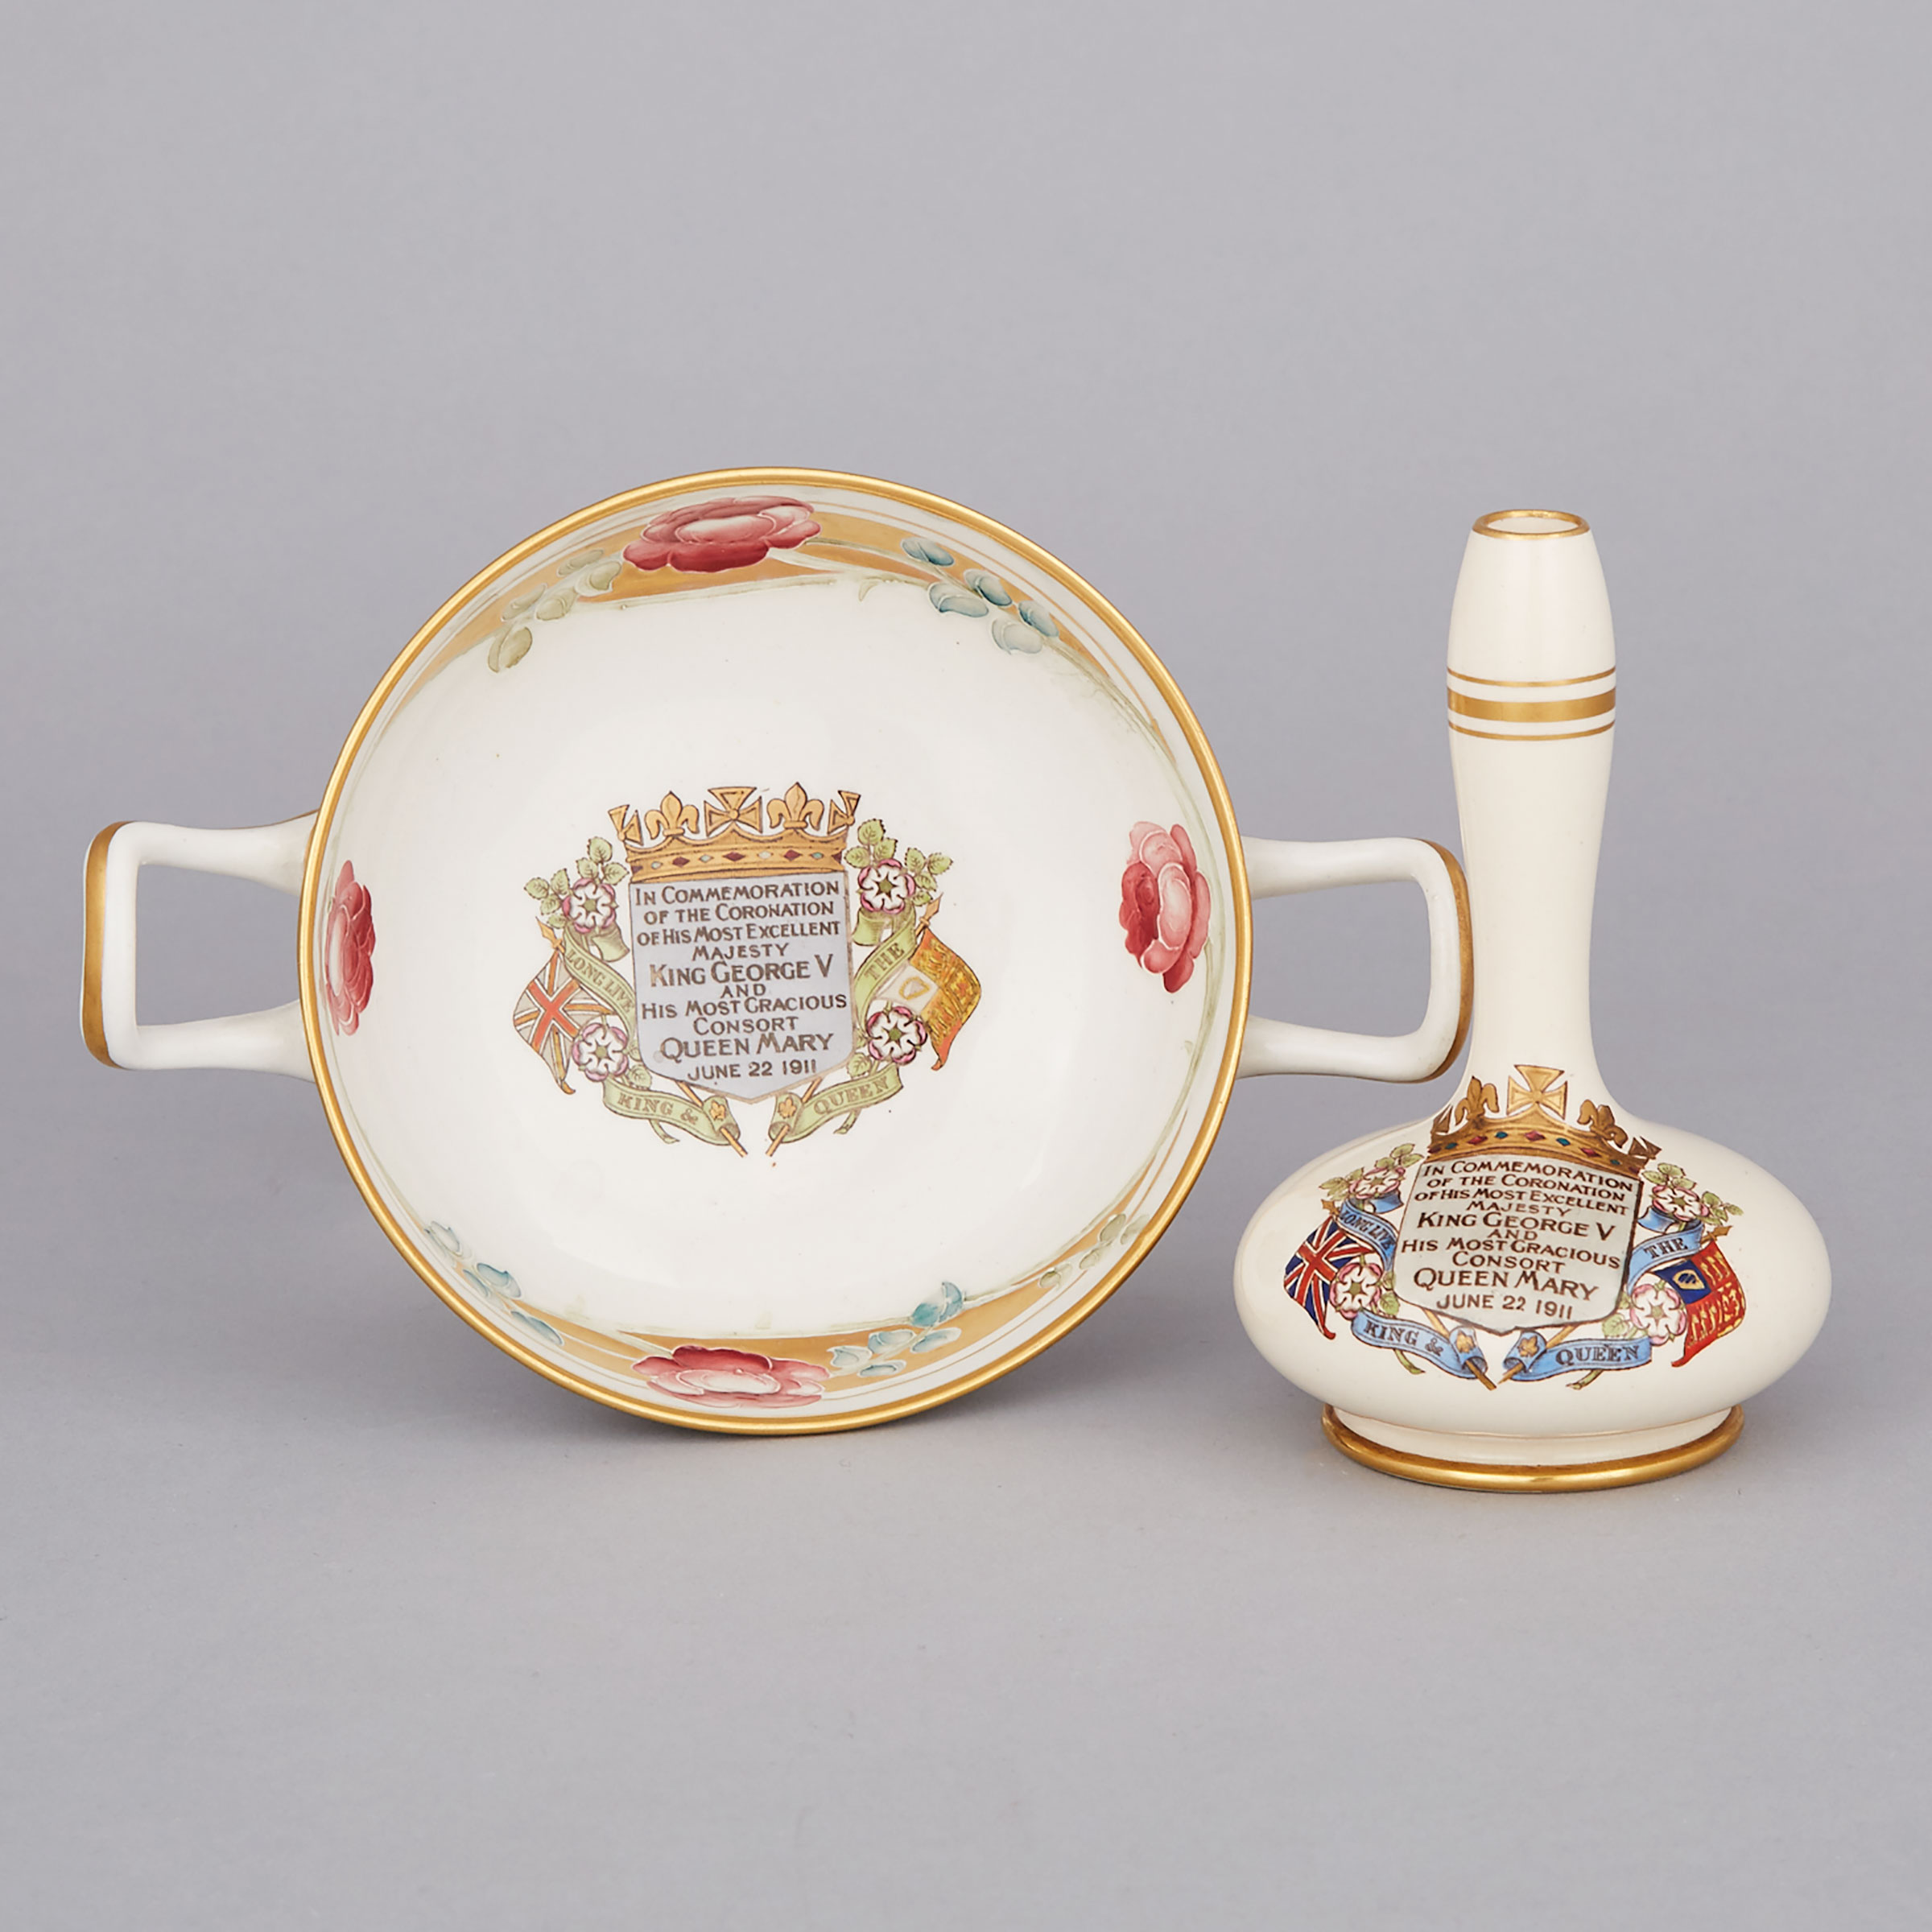 Macintyre Moorcroft Armorial King George V Coronation Commemorative Two Handled Dish and a Vase, 1911